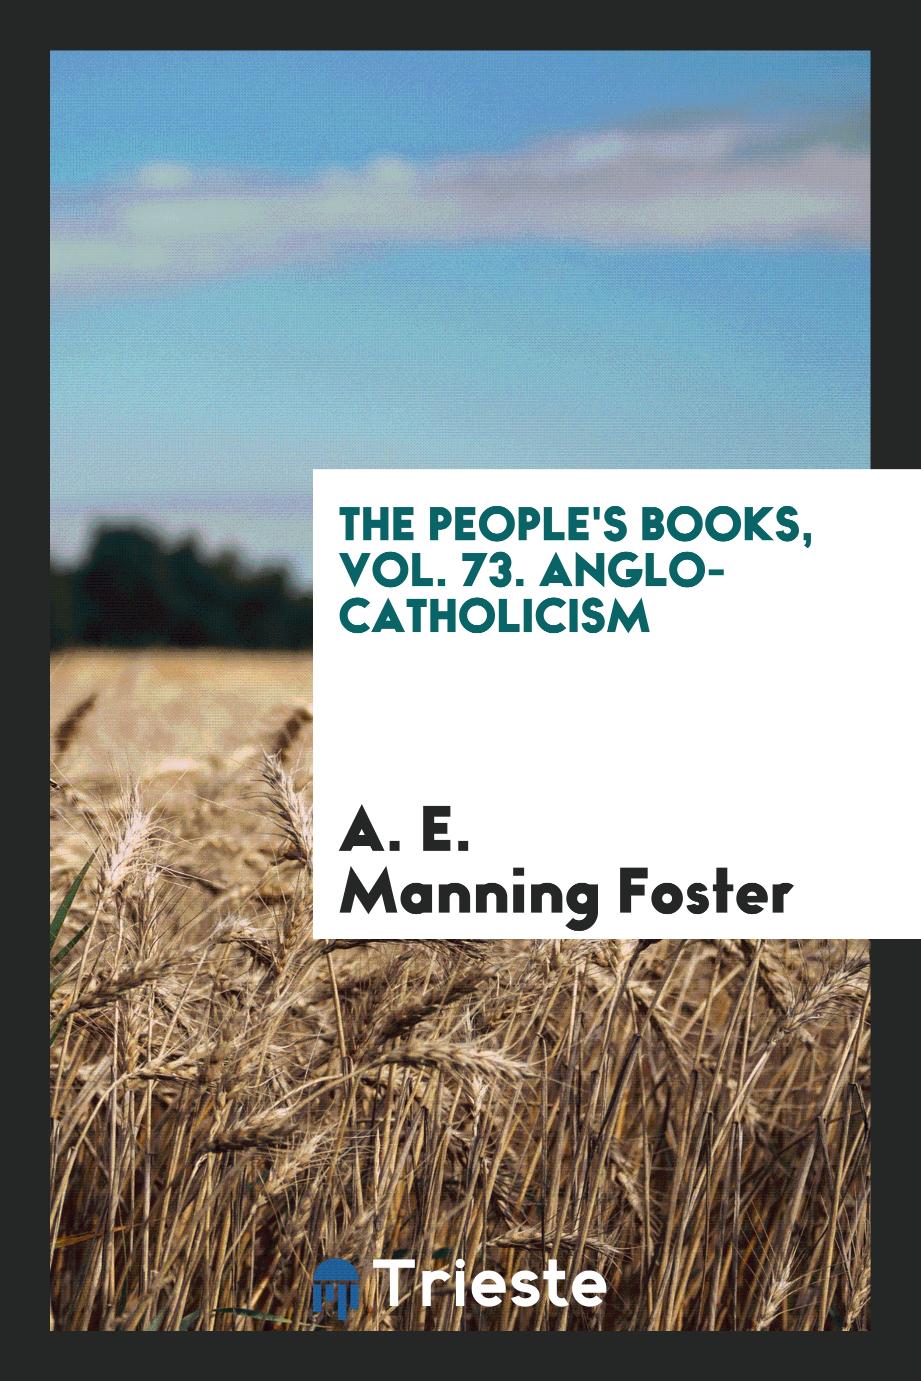 The people's books, Vol. 73. Anglo-Catholicism